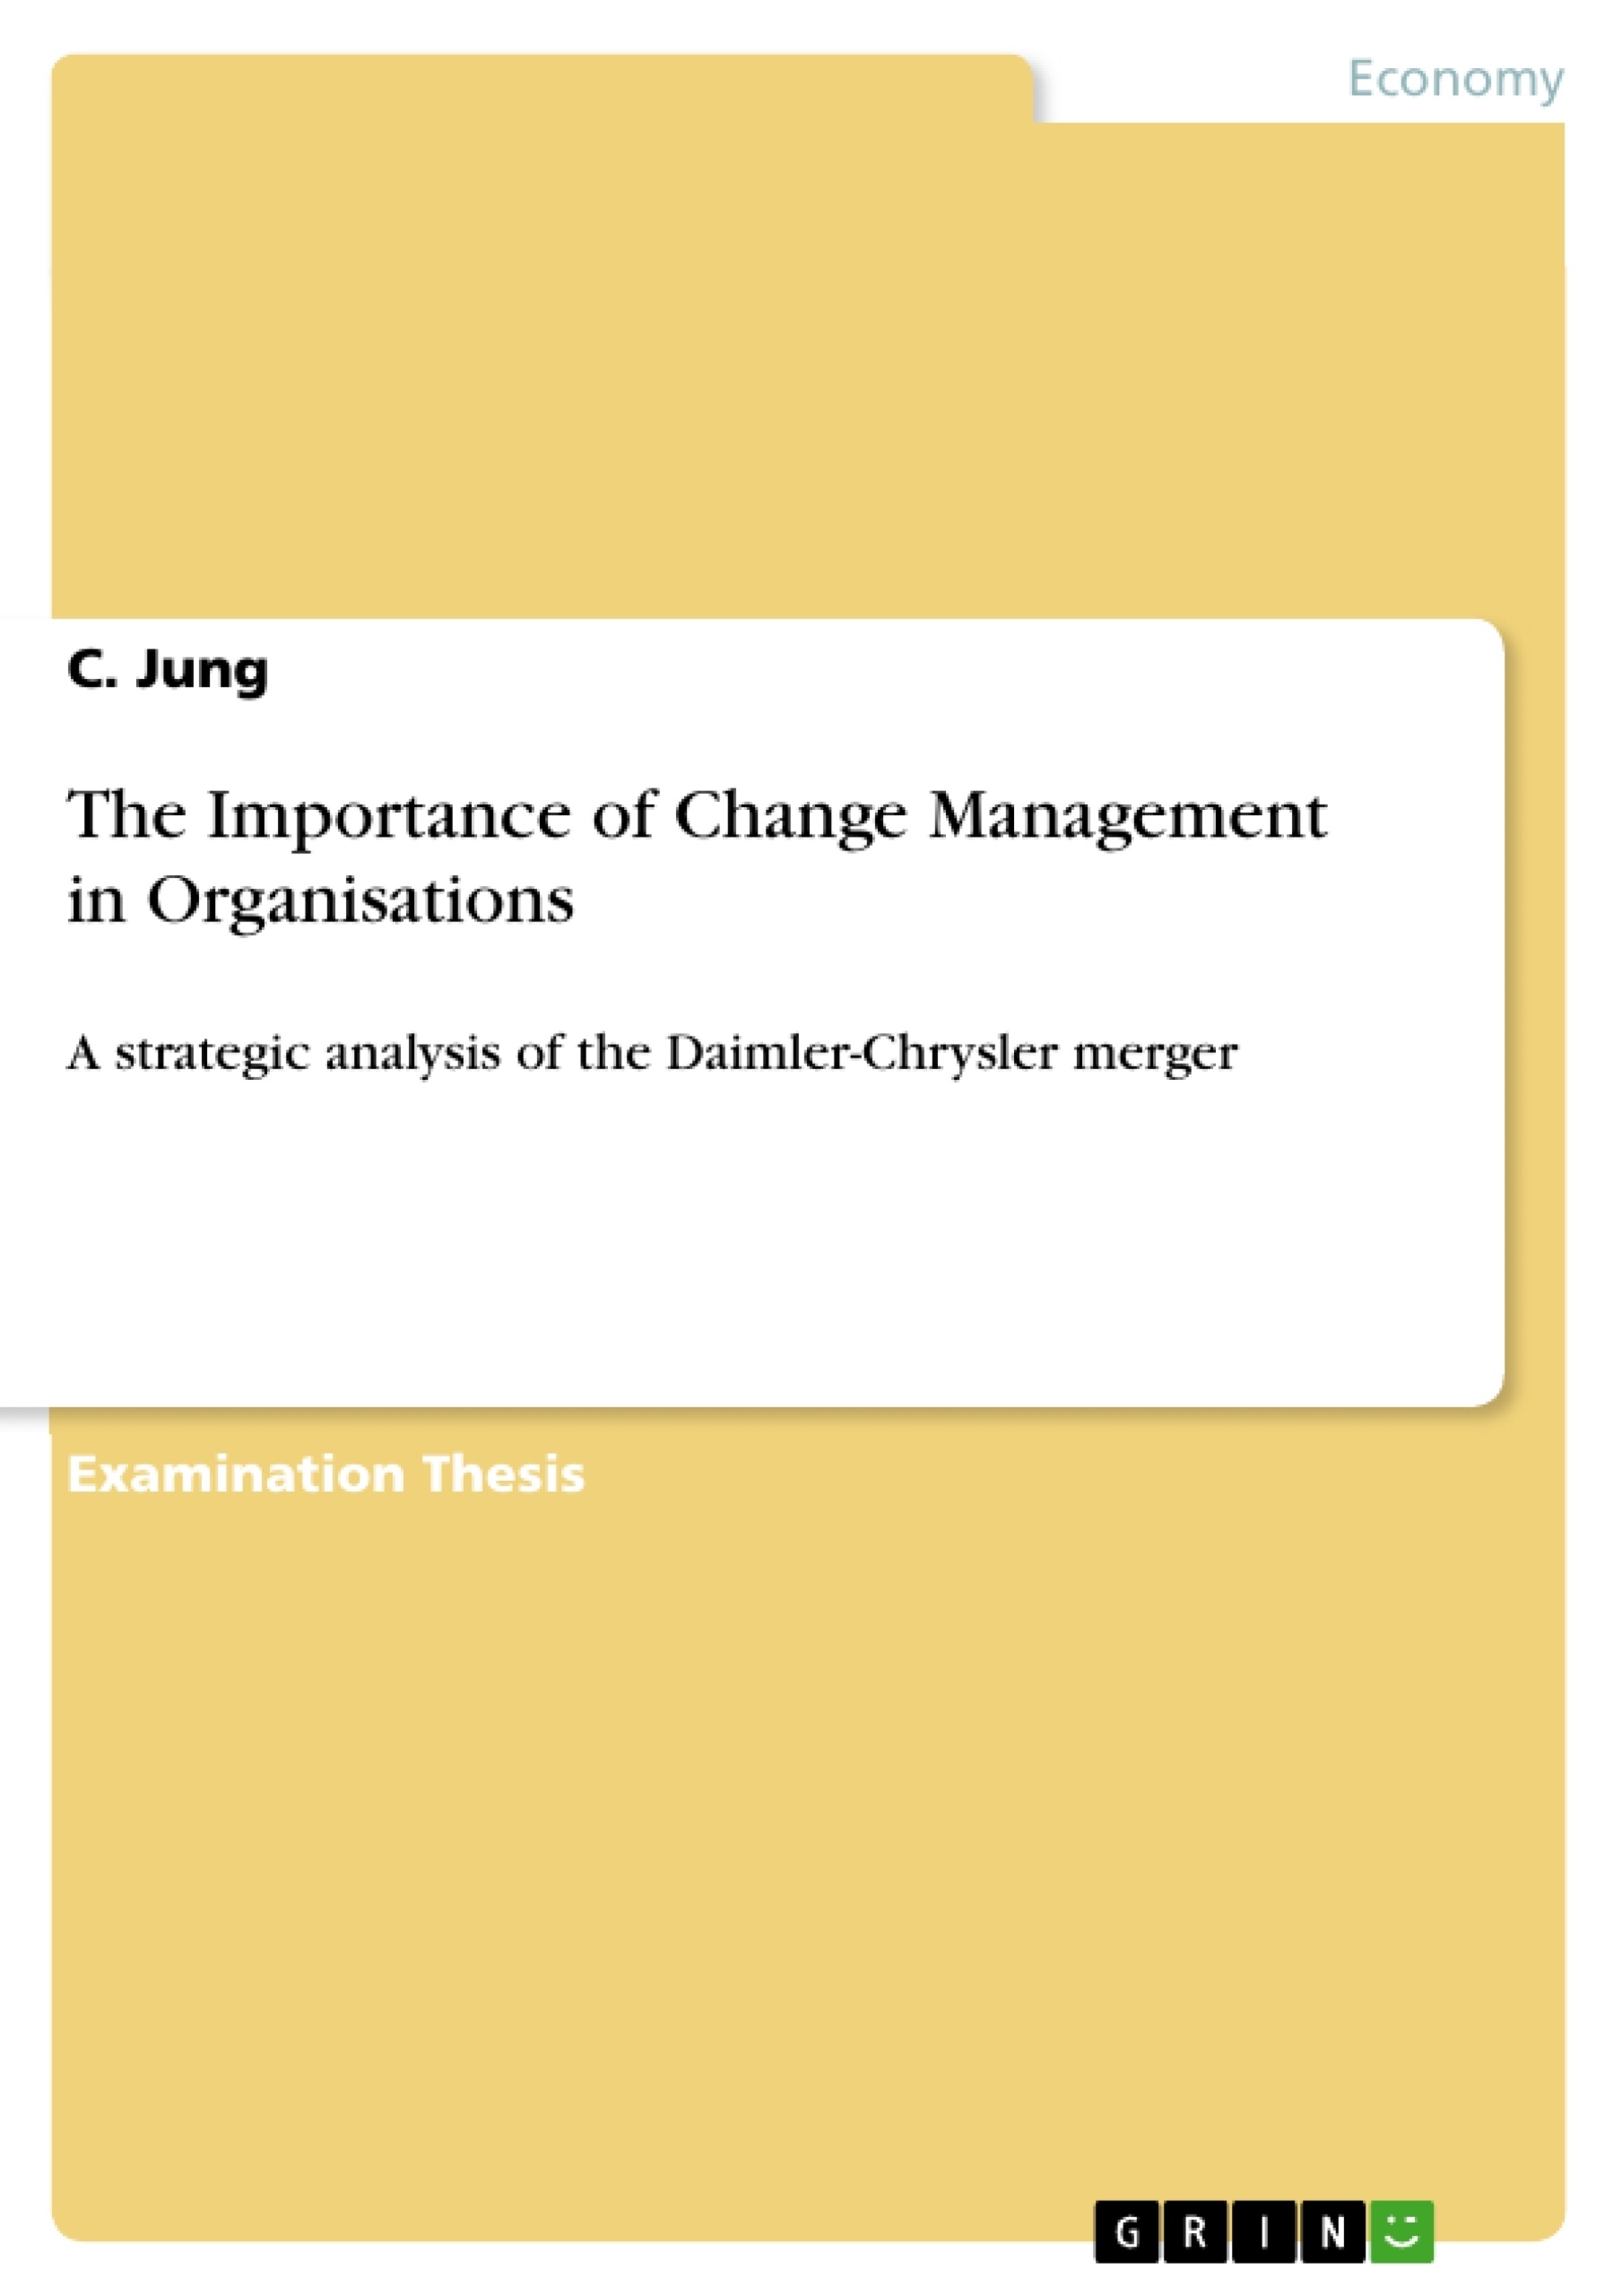 Titre: The Importance of Change Management in Organisations